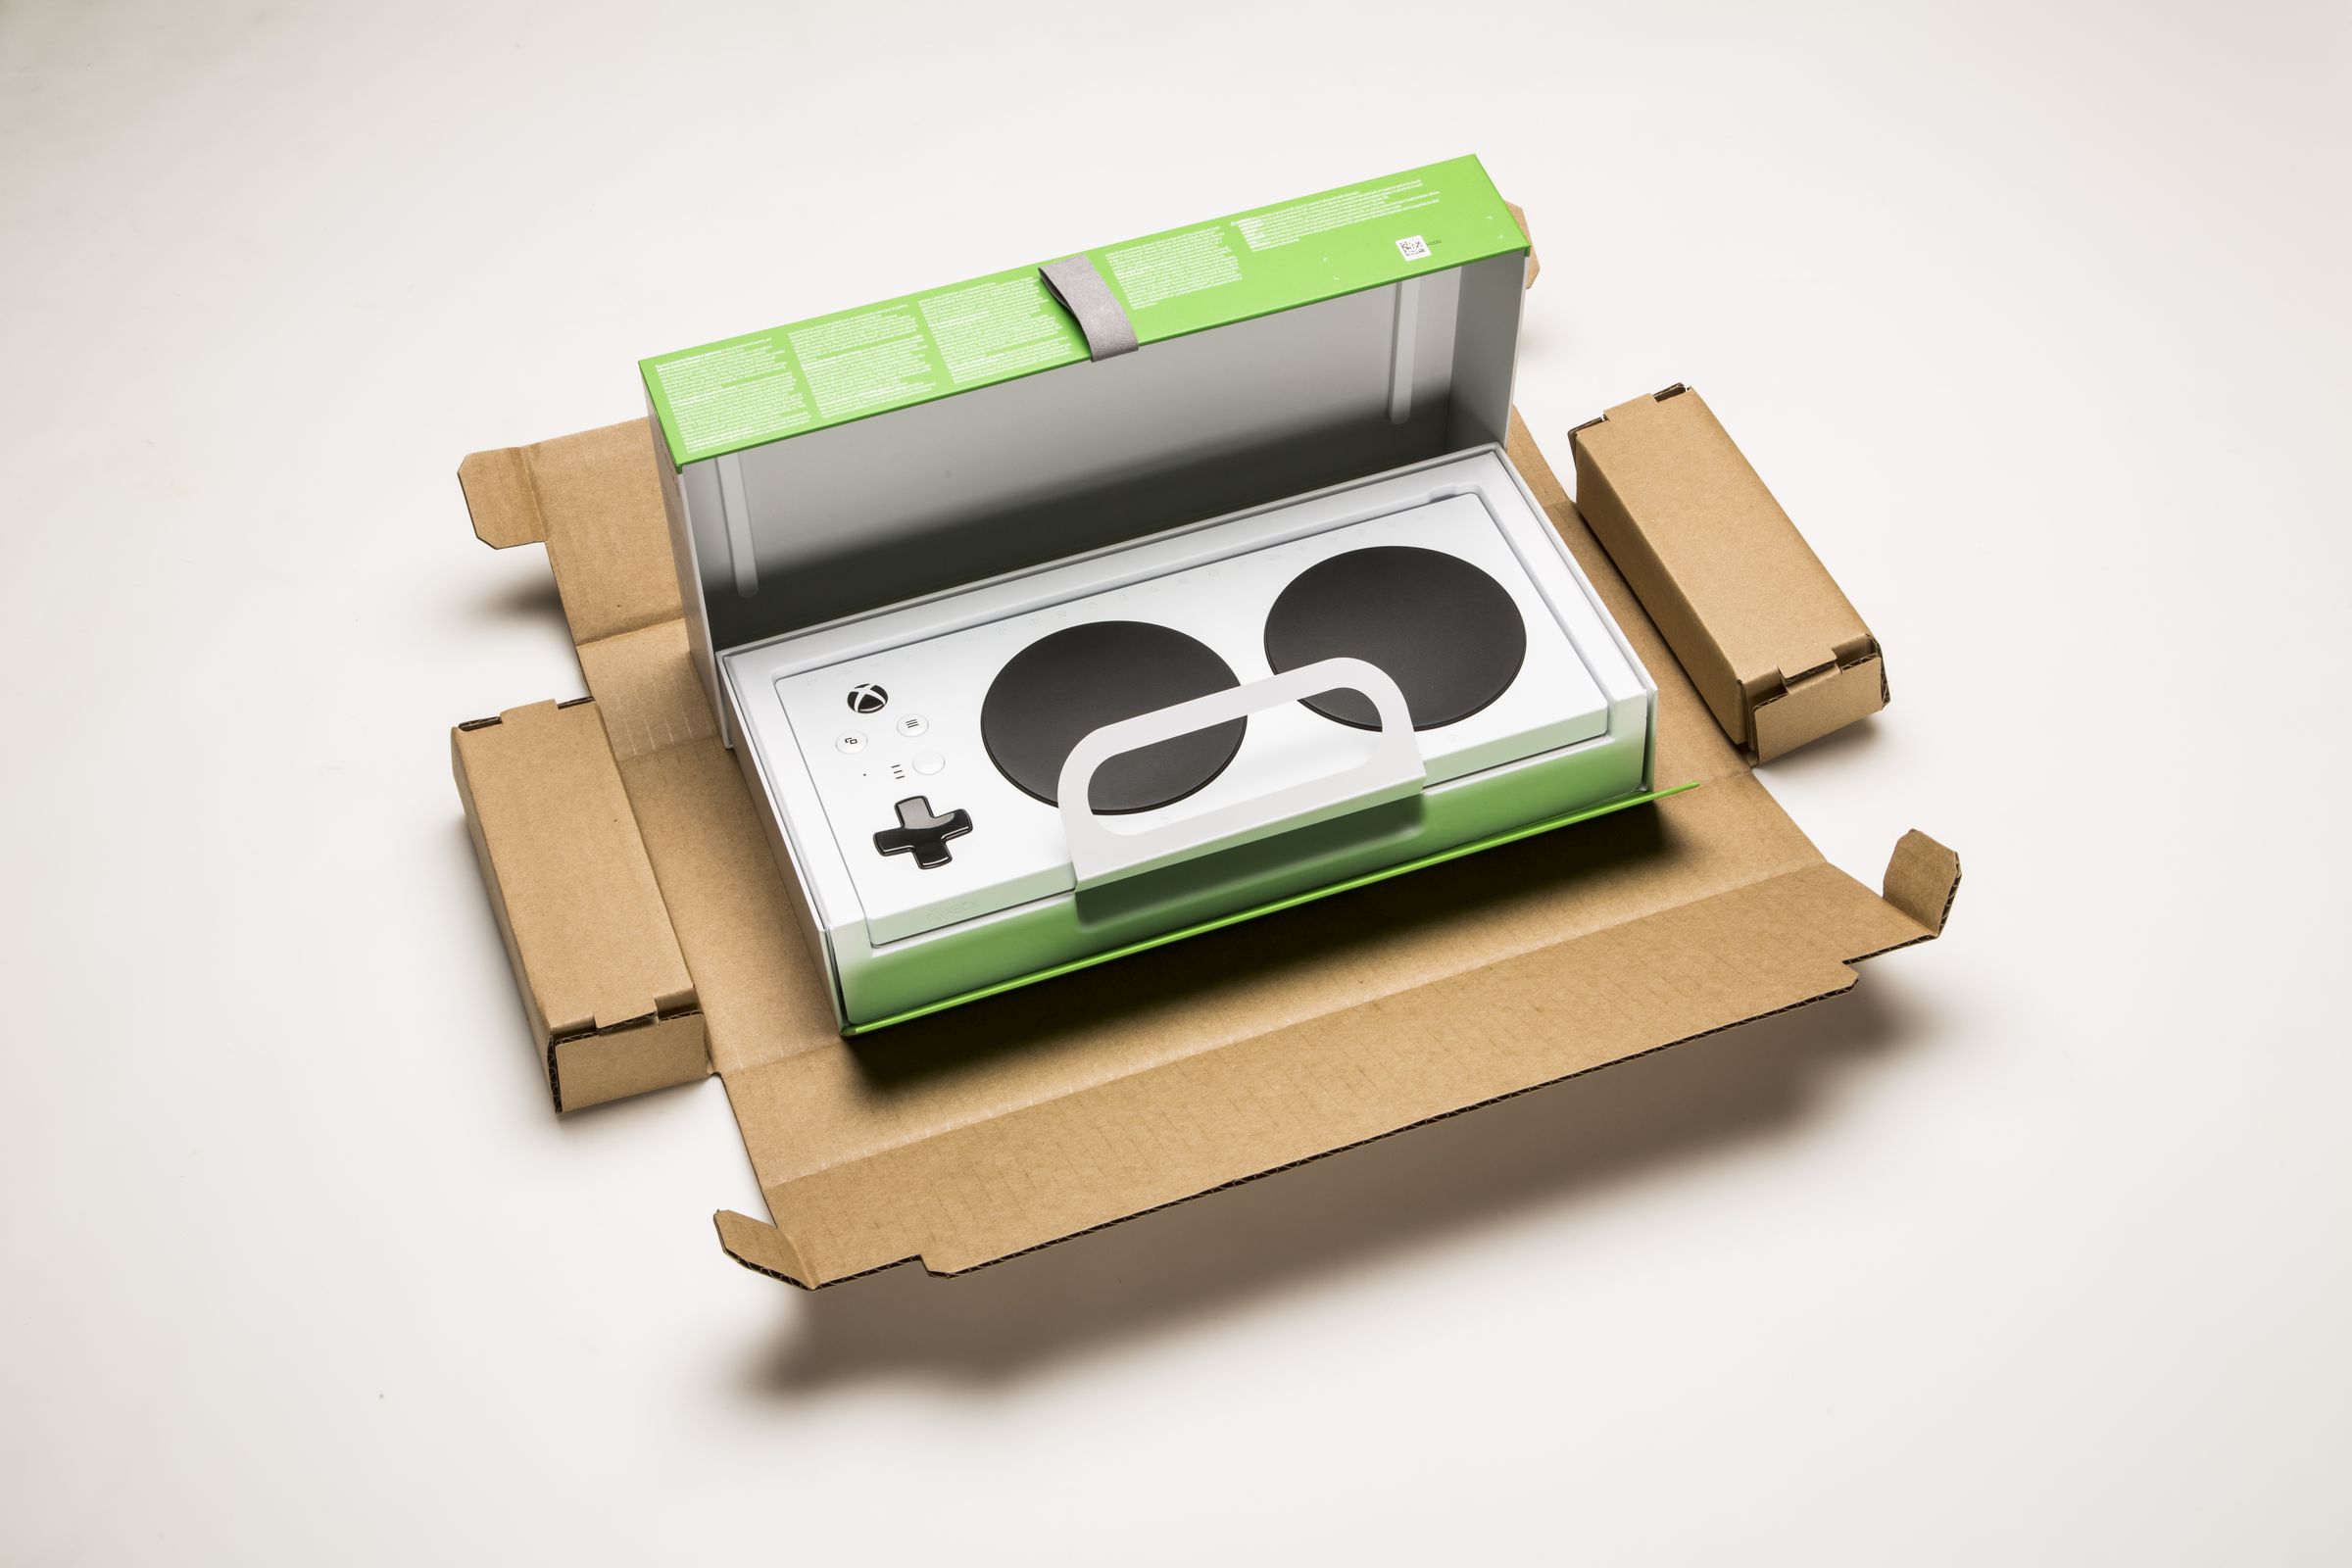 The packaging for the Xbox Adaptive Controller